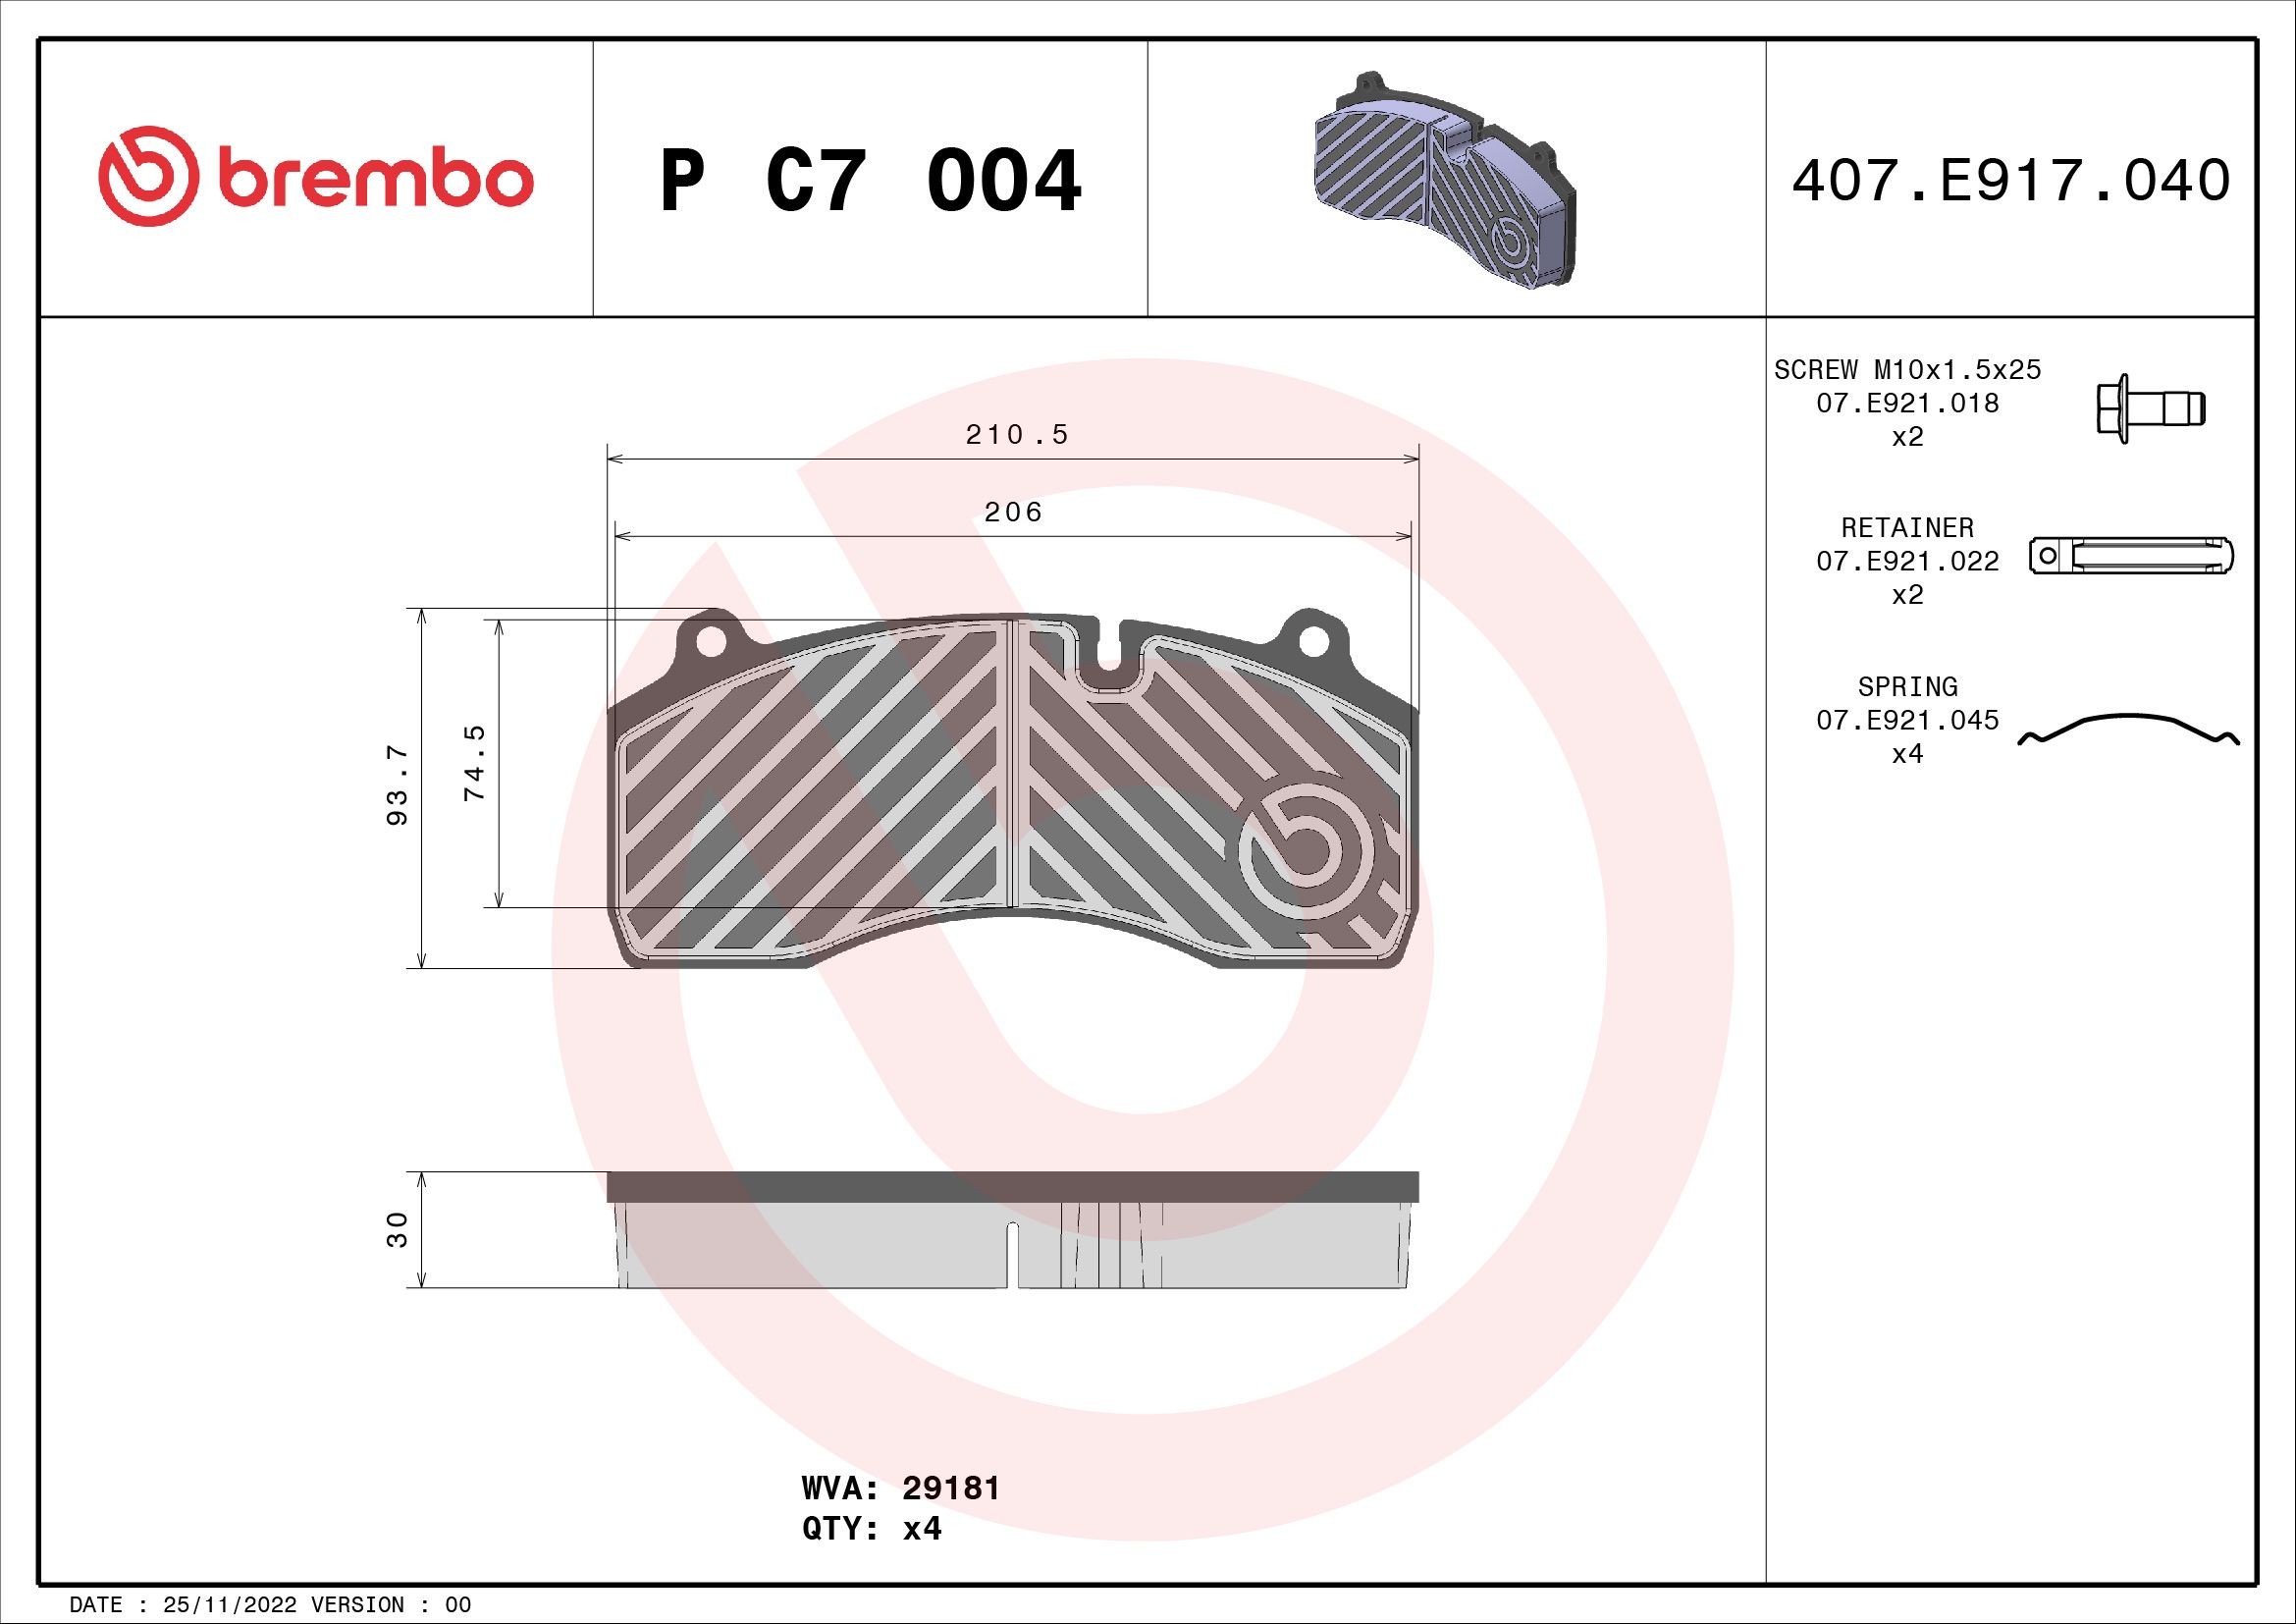 BREMBO P C7 004 Brake pad set prepared for wear indicator, with accessories